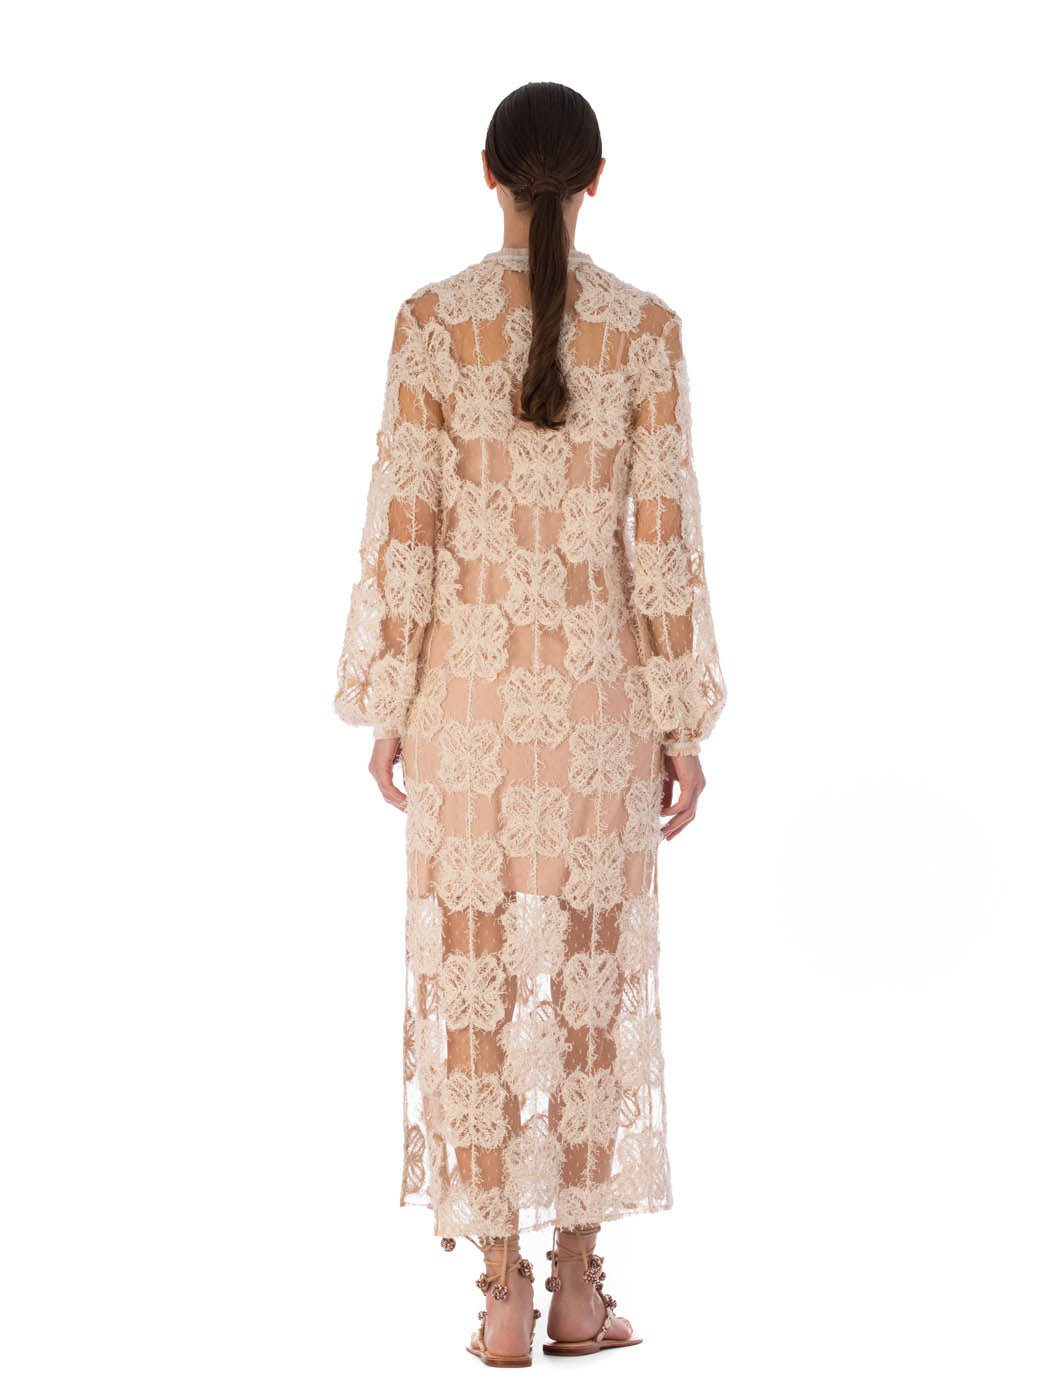 A long, Mayfair Tunic Cream Flowers lace maxi tunic with floral patterns and three-quarter sleeves, displayed against a white background.